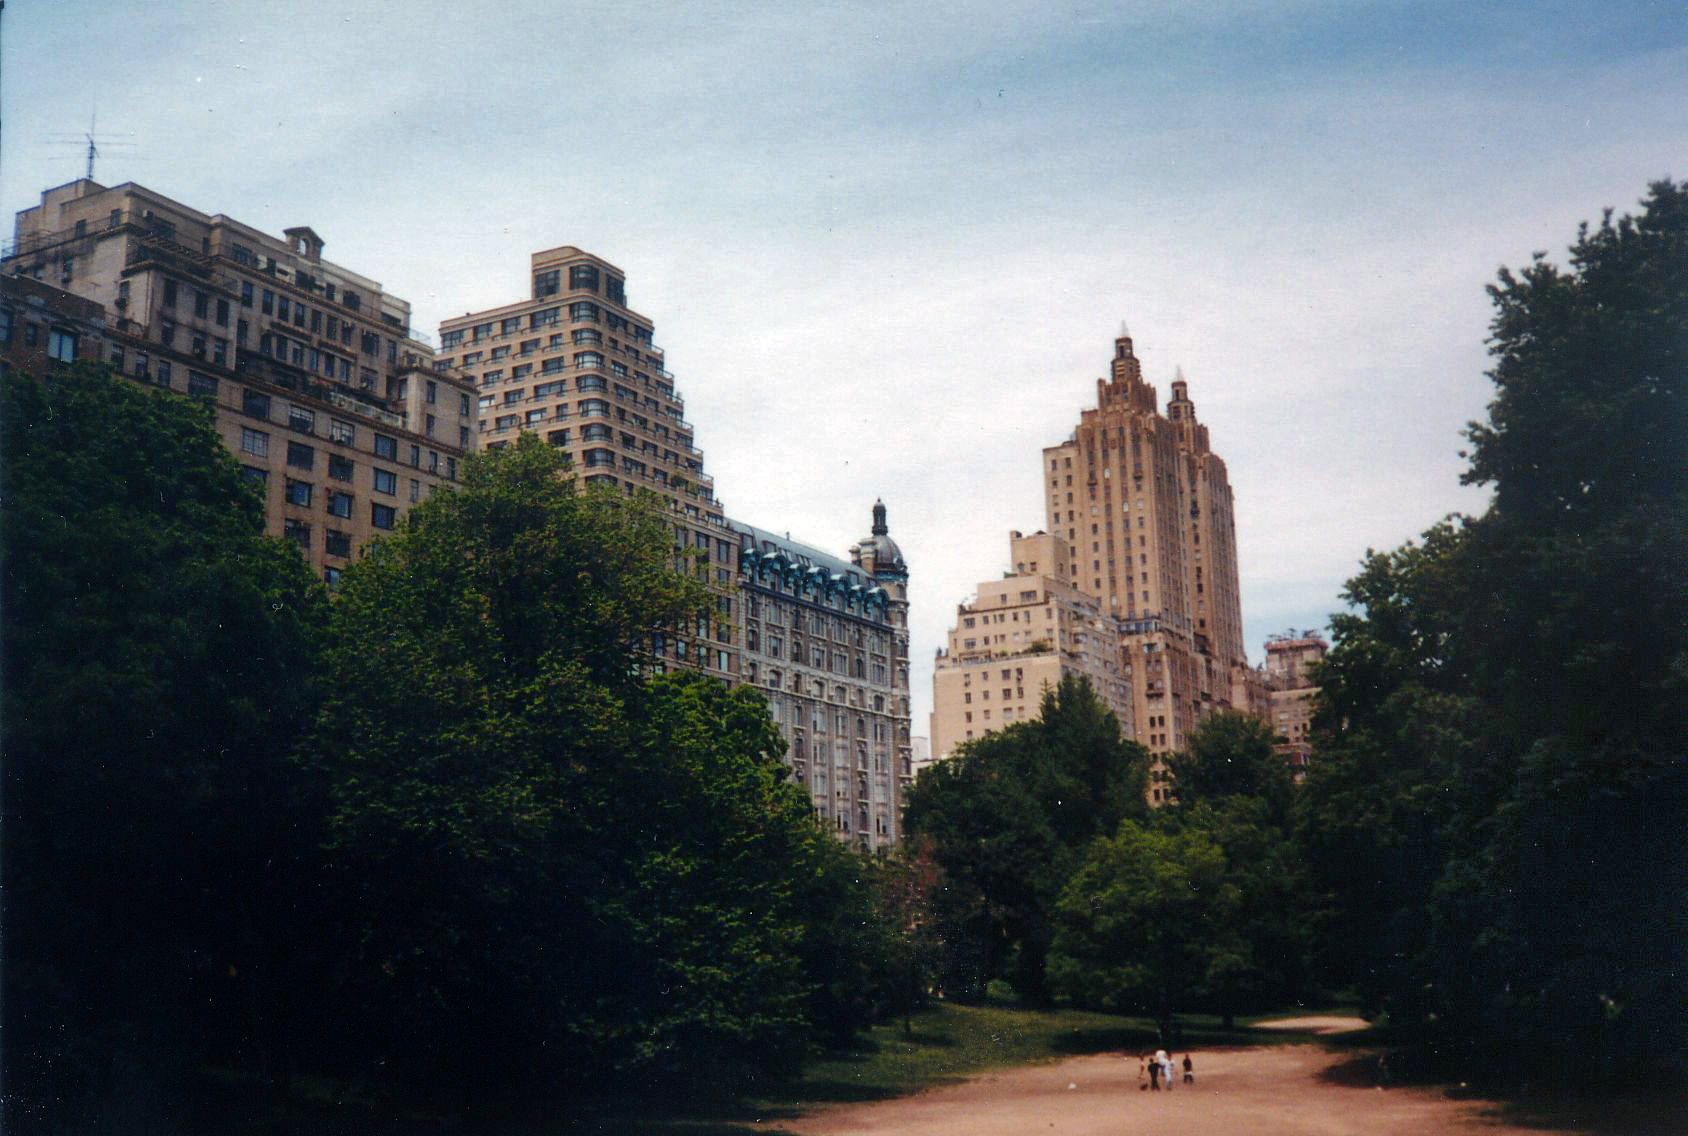 I took this on my first trip to New York City in May 1999. A lot of photos were taken in my 4 days I was there, but this was my favorite, I don't know why but the photo seemed to come out so cool looking, the buildings looming over the trees. 